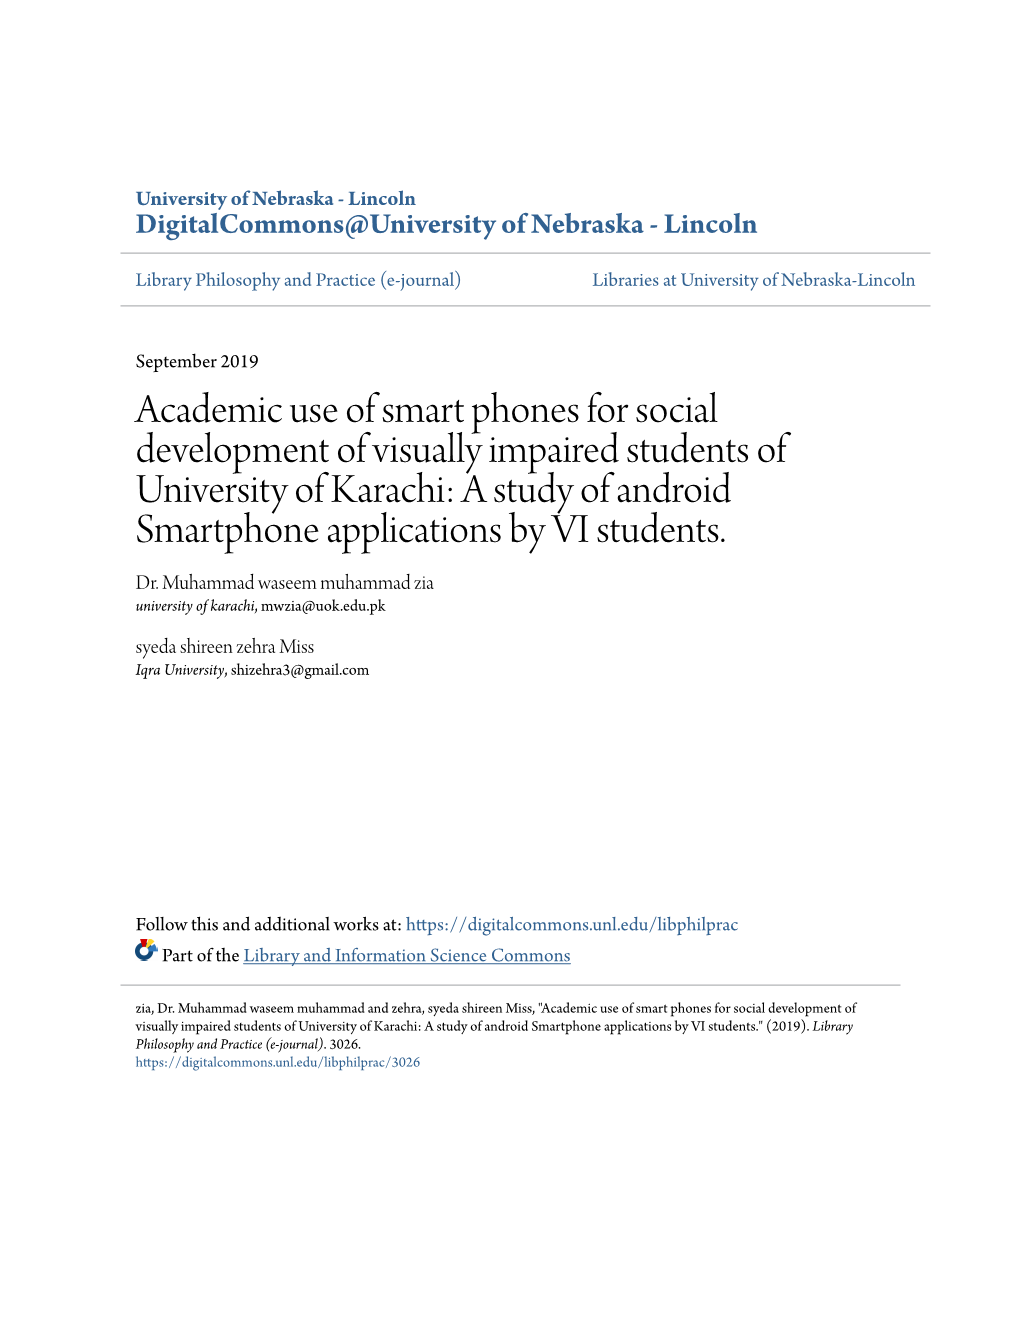 Academic Use of Smart Phones for Social Development of Visually Impaired Students of University of Karachi: a Study of Android Smartphone Applications by VI Students